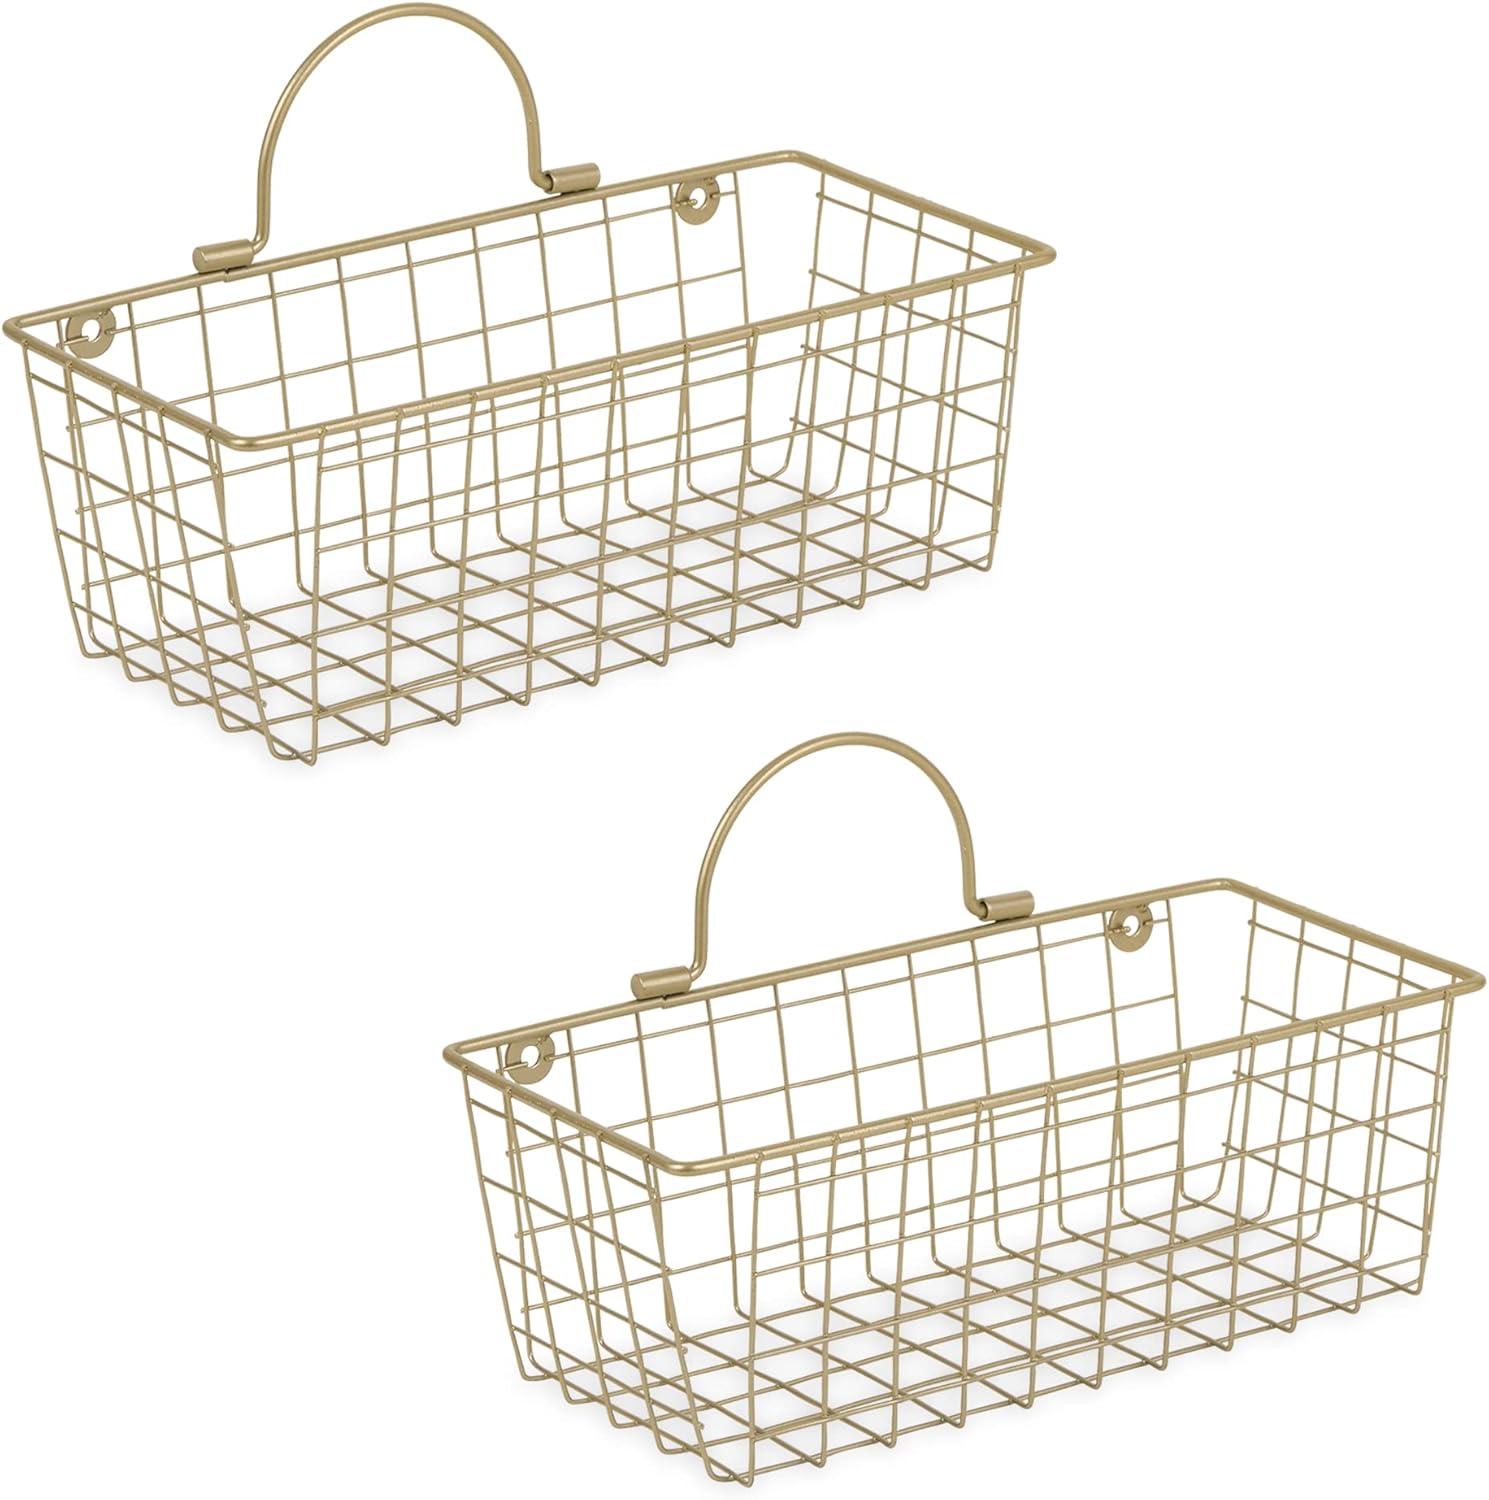 Vintage Gold Wire Wall Basket Set, Small Rectangular, 11.8"